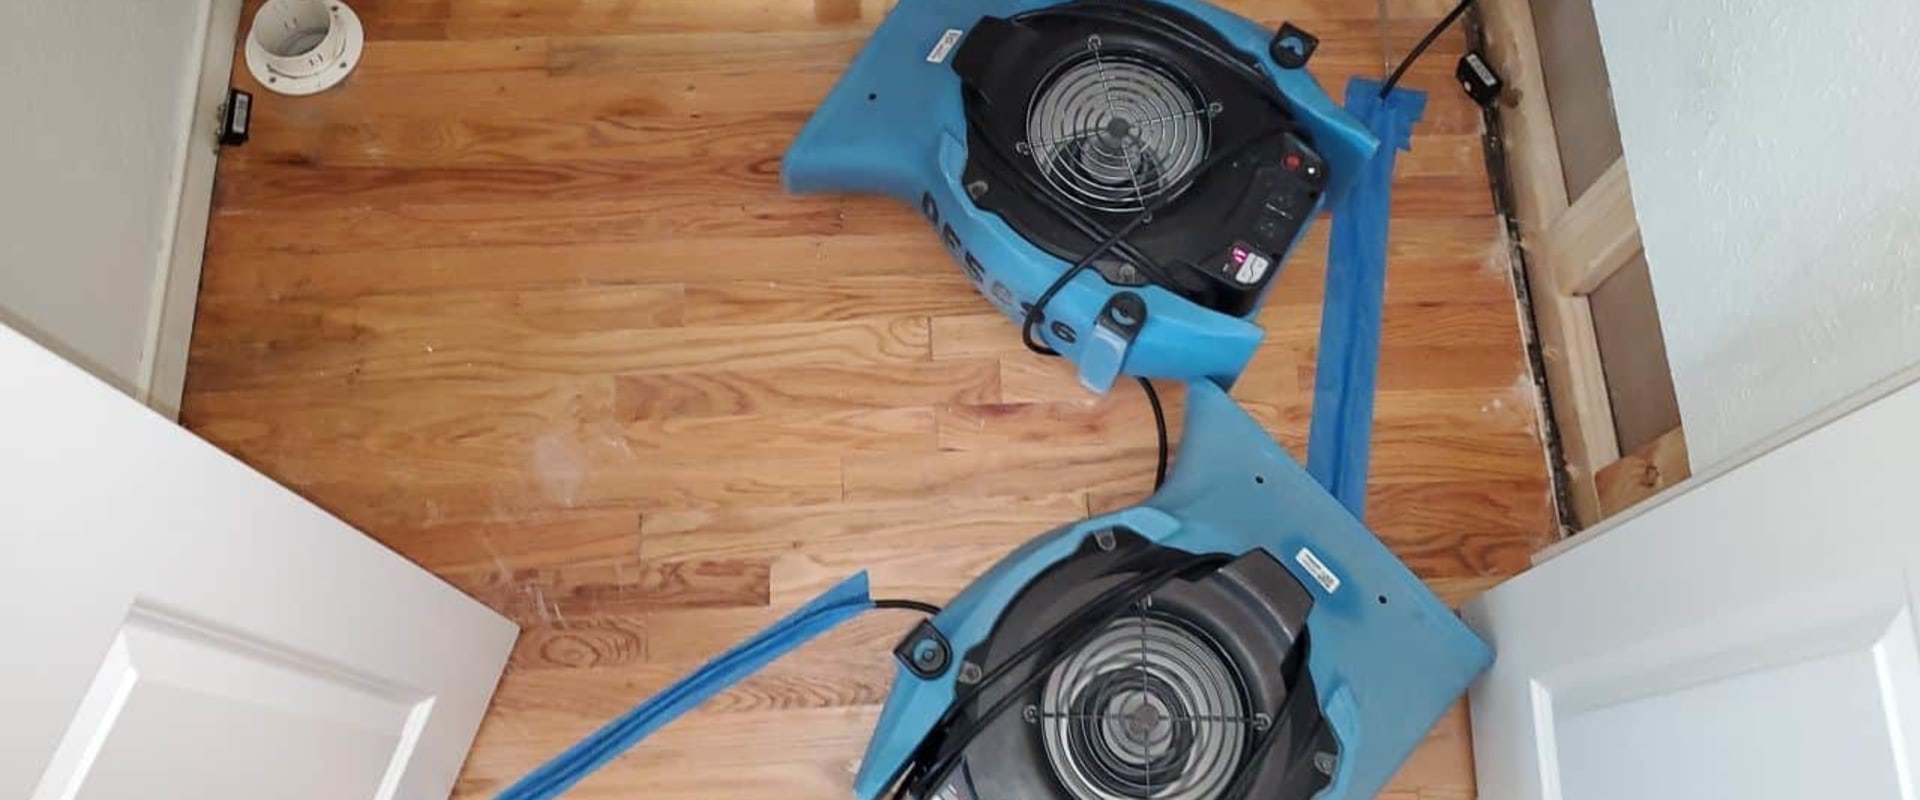 Using Dehumidifiers and Fans for Drying Affected Areas